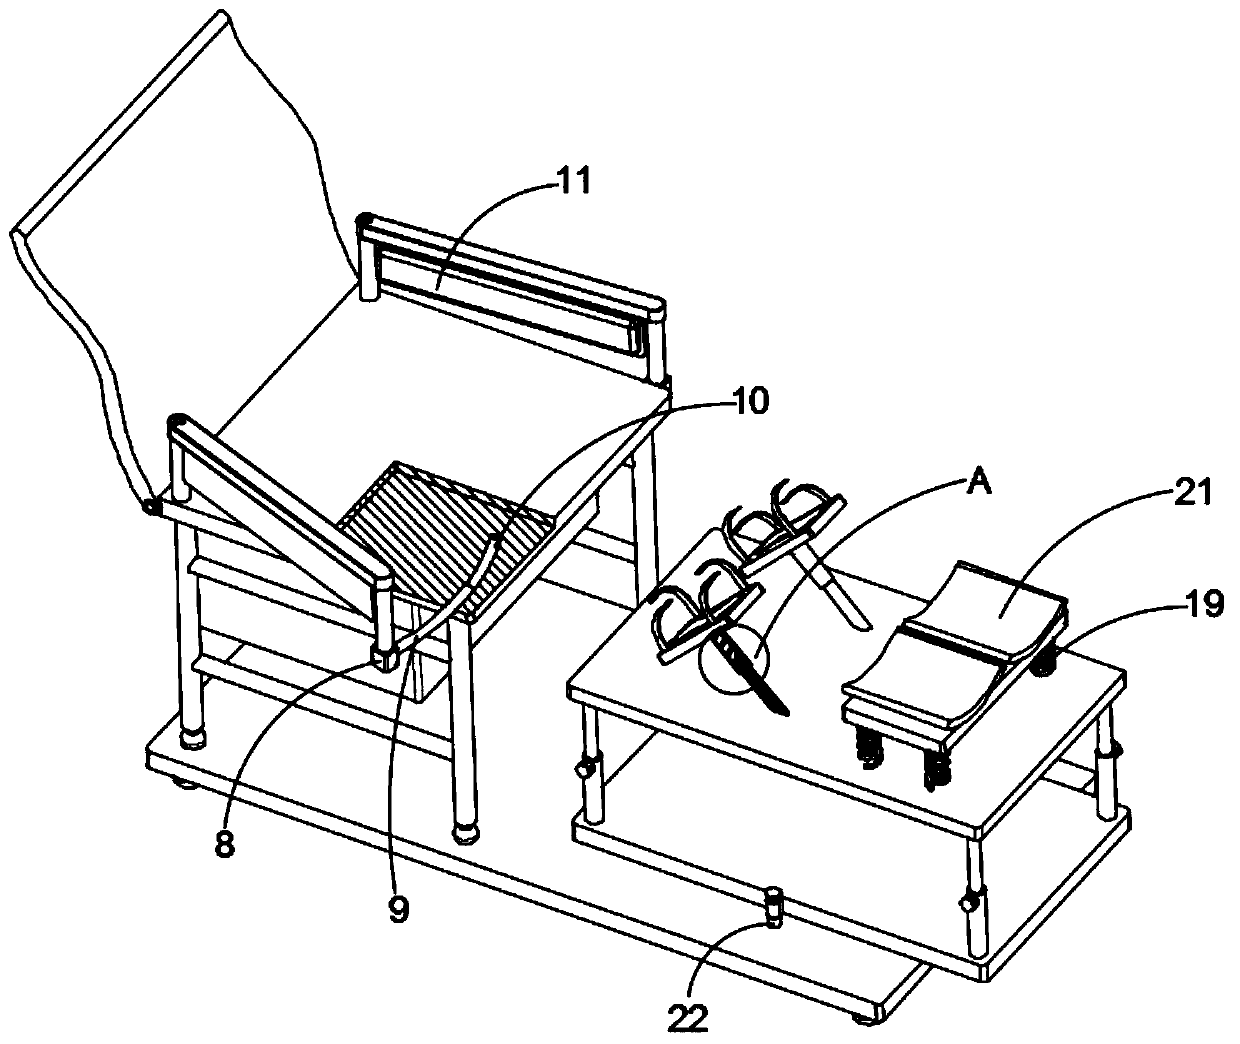 Obstetric apparatus for assisting delivery